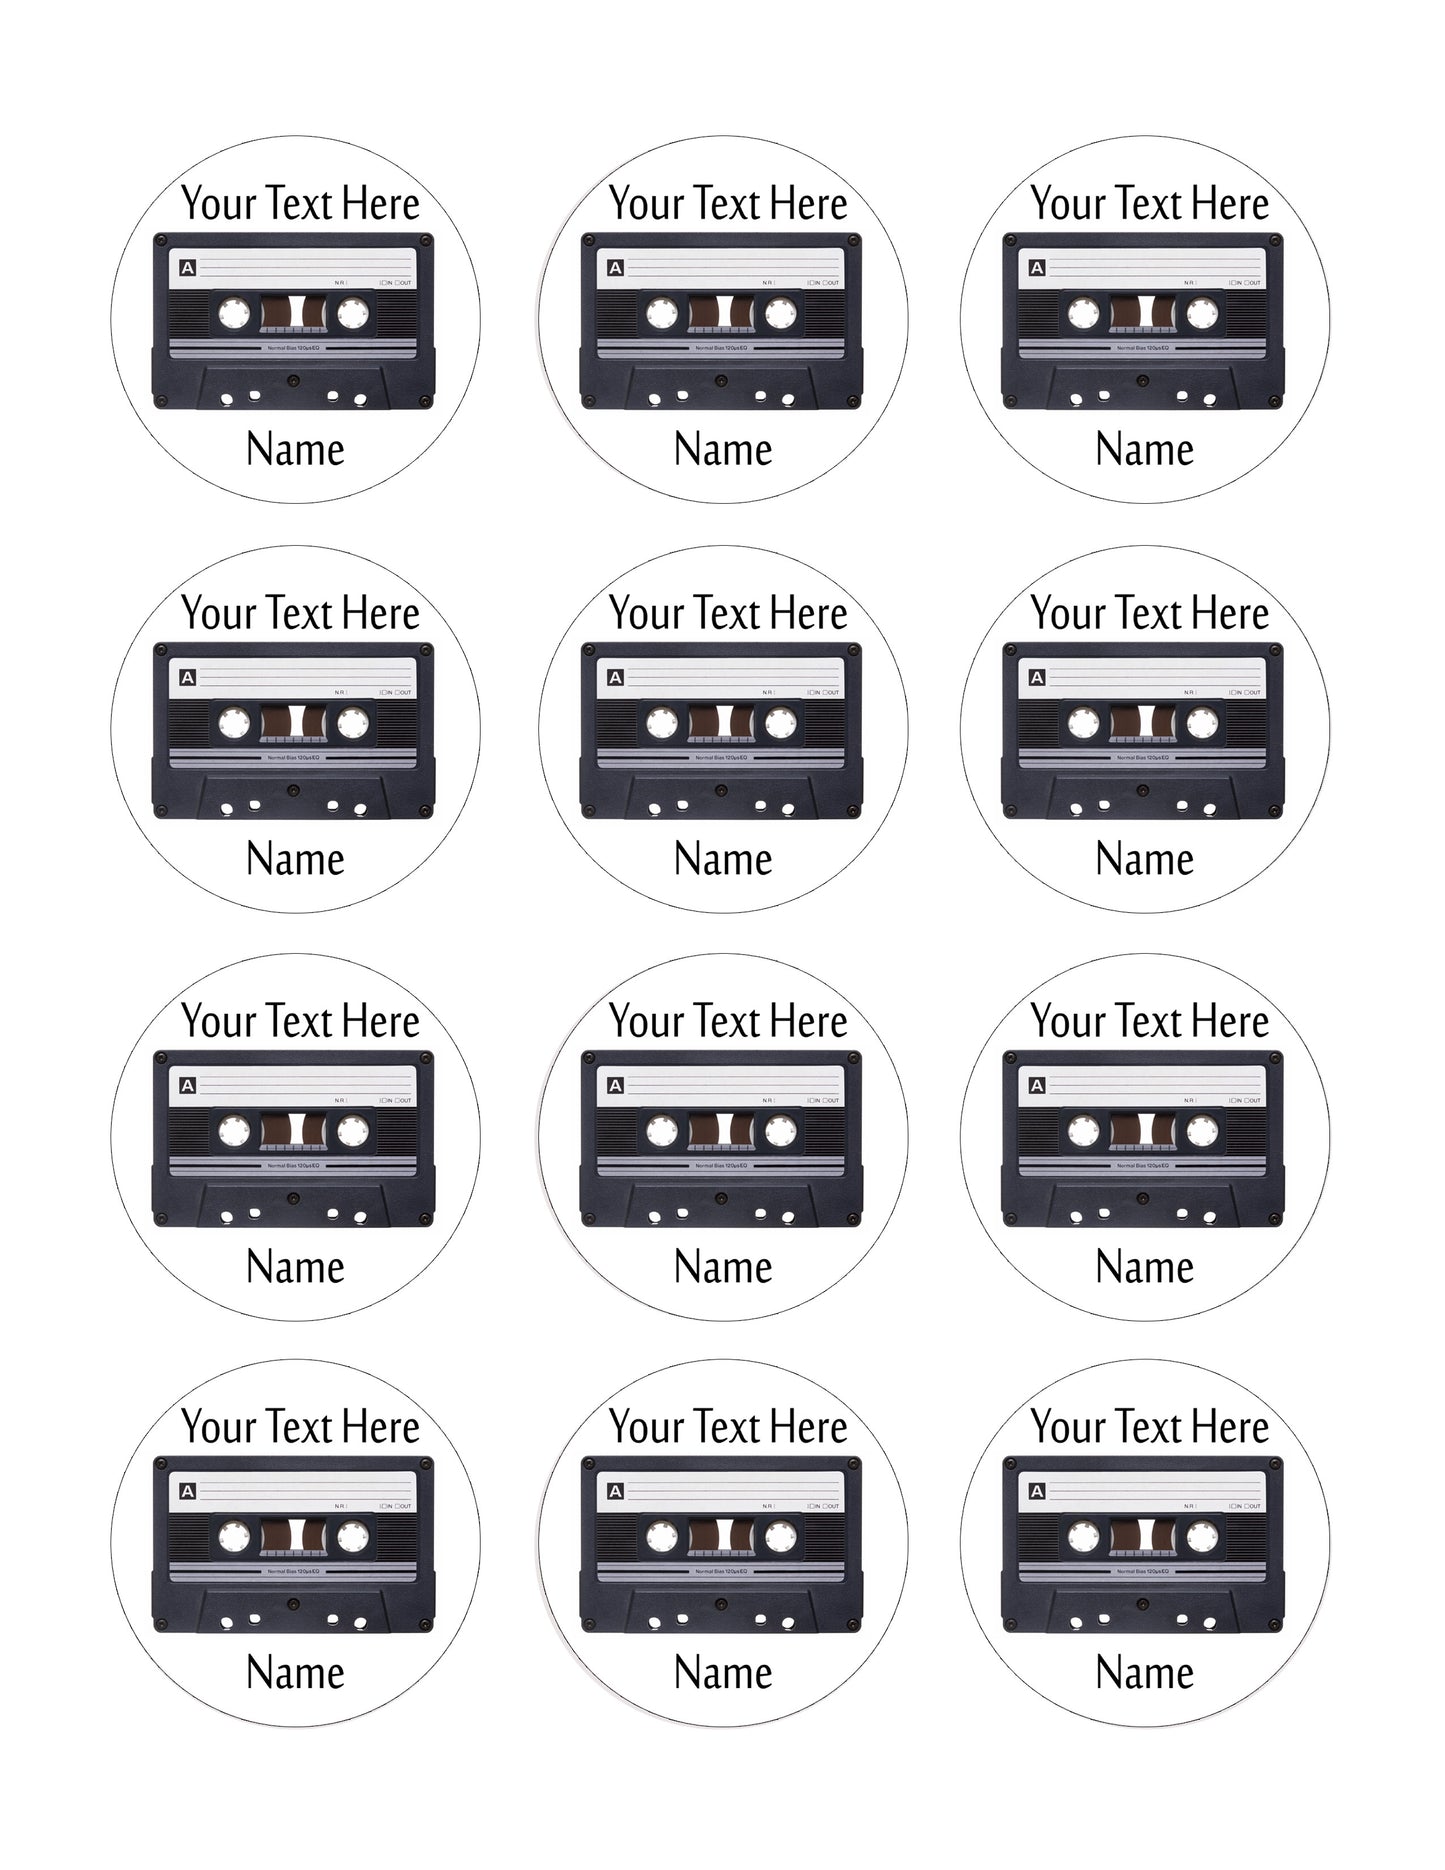 Audio Cassette - Edible Cake Topper, Cupcake Toppers, Strips